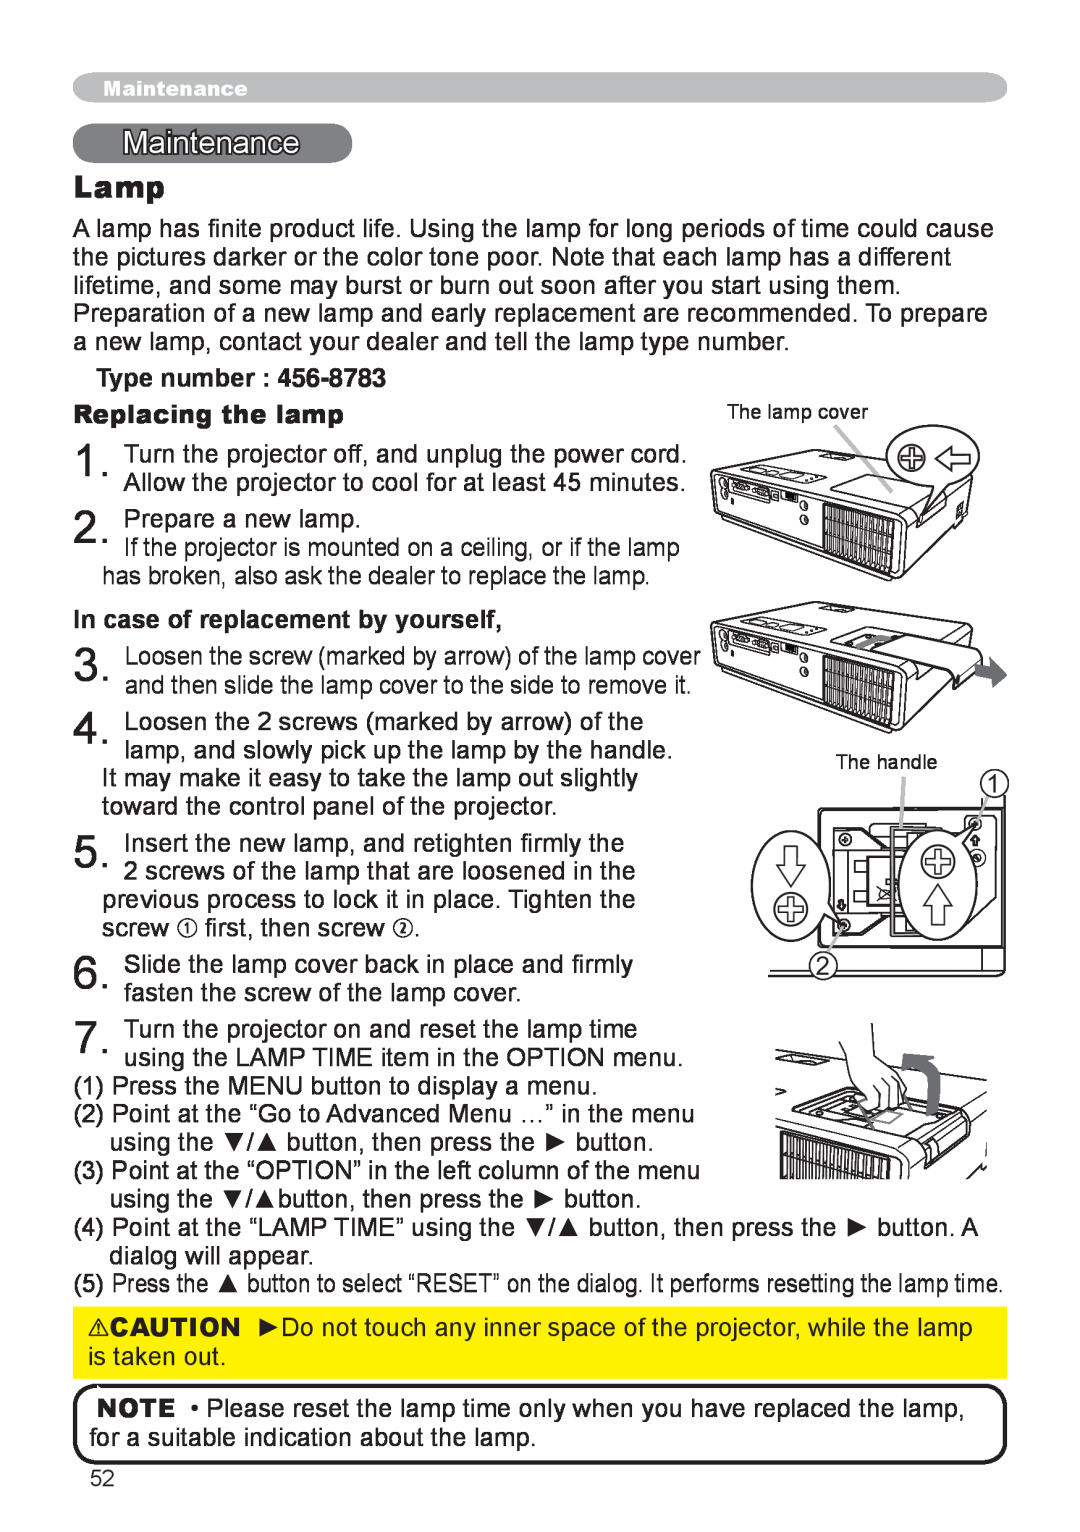 Dukane 8783 user manual Maintenance, Lamp, Type number Replacing the lamp, In case of replacement by yourself 